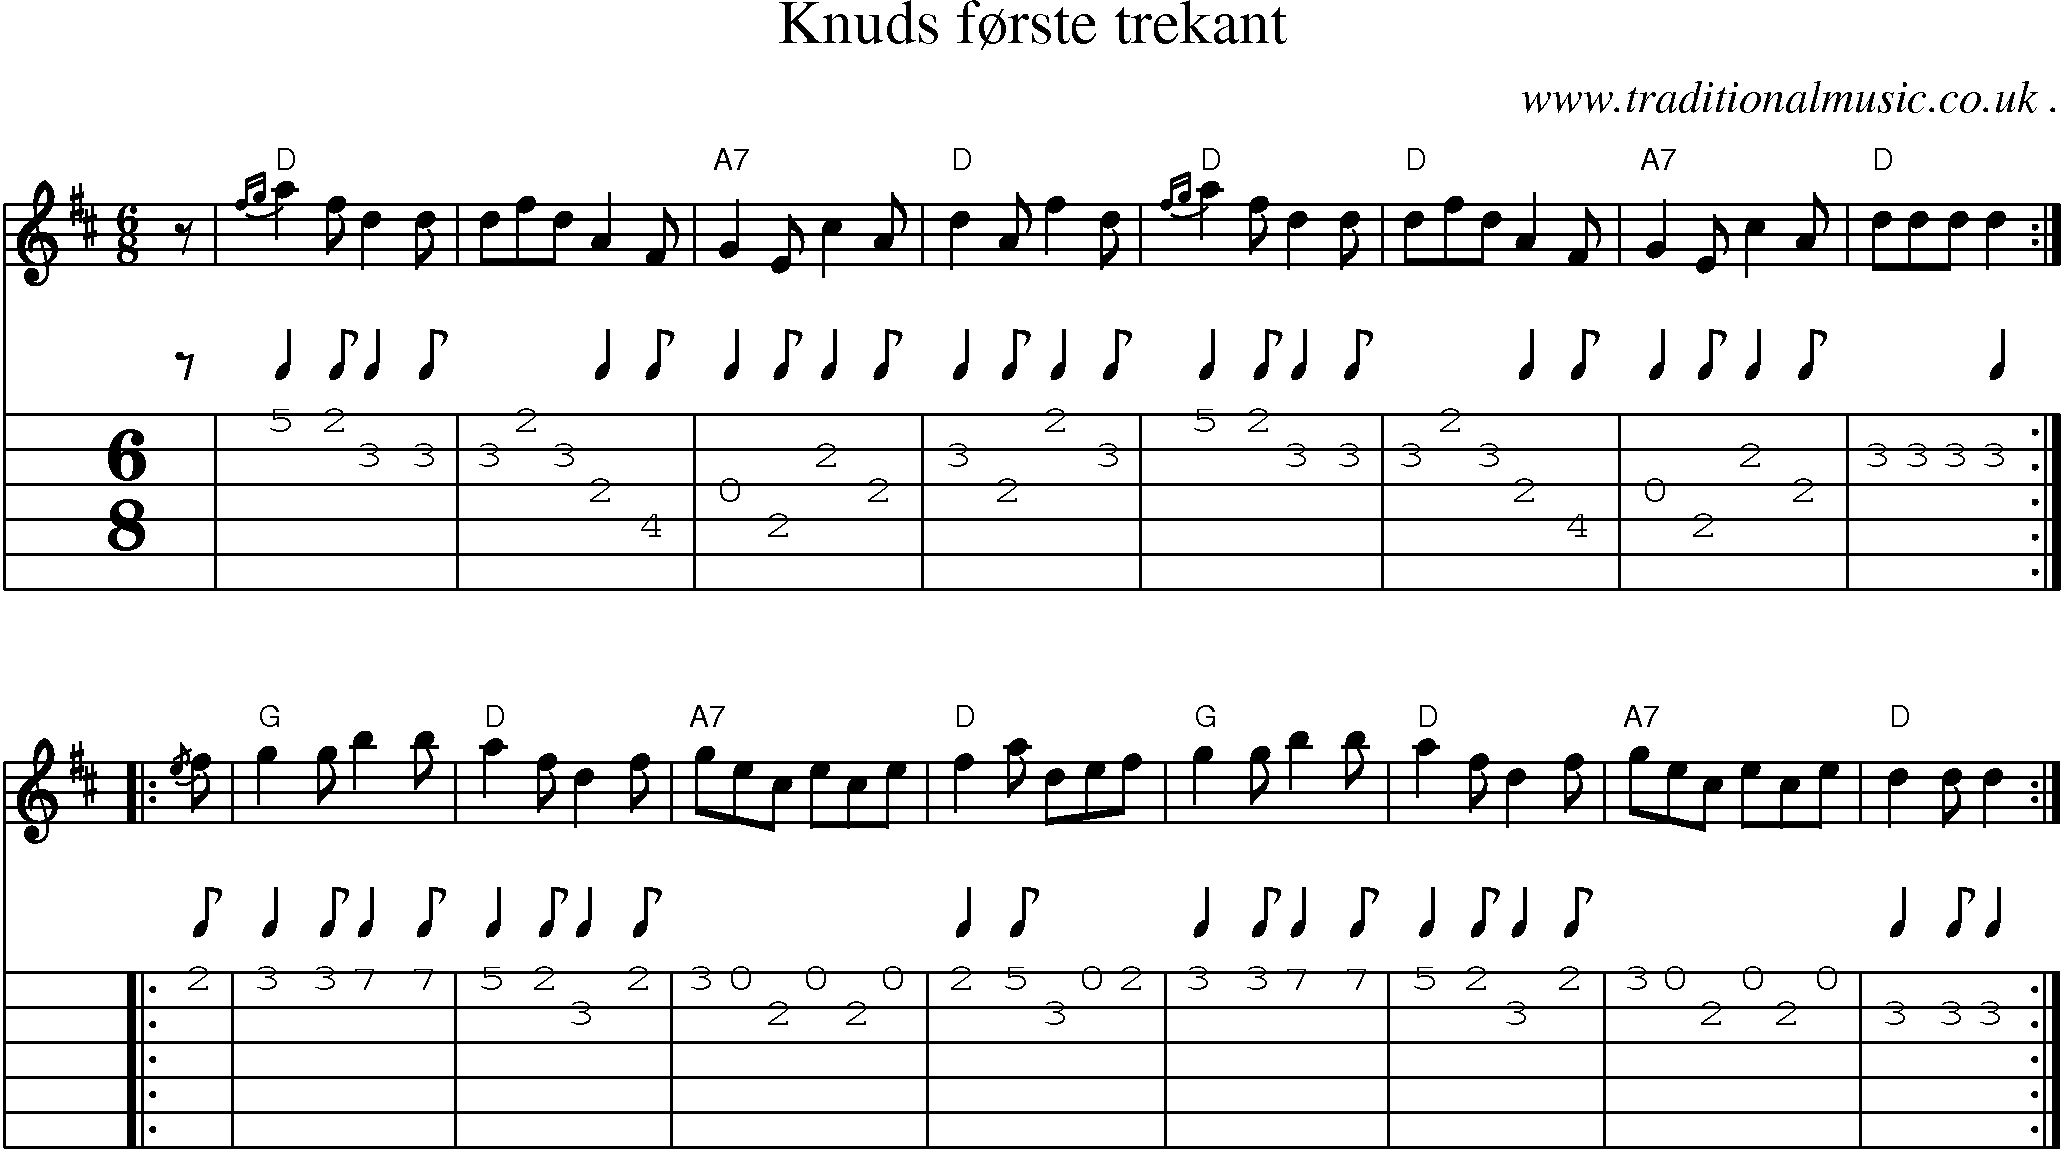 Sheet-music  score, Chords and Guitar Tabs for Knuds Forste Trekant